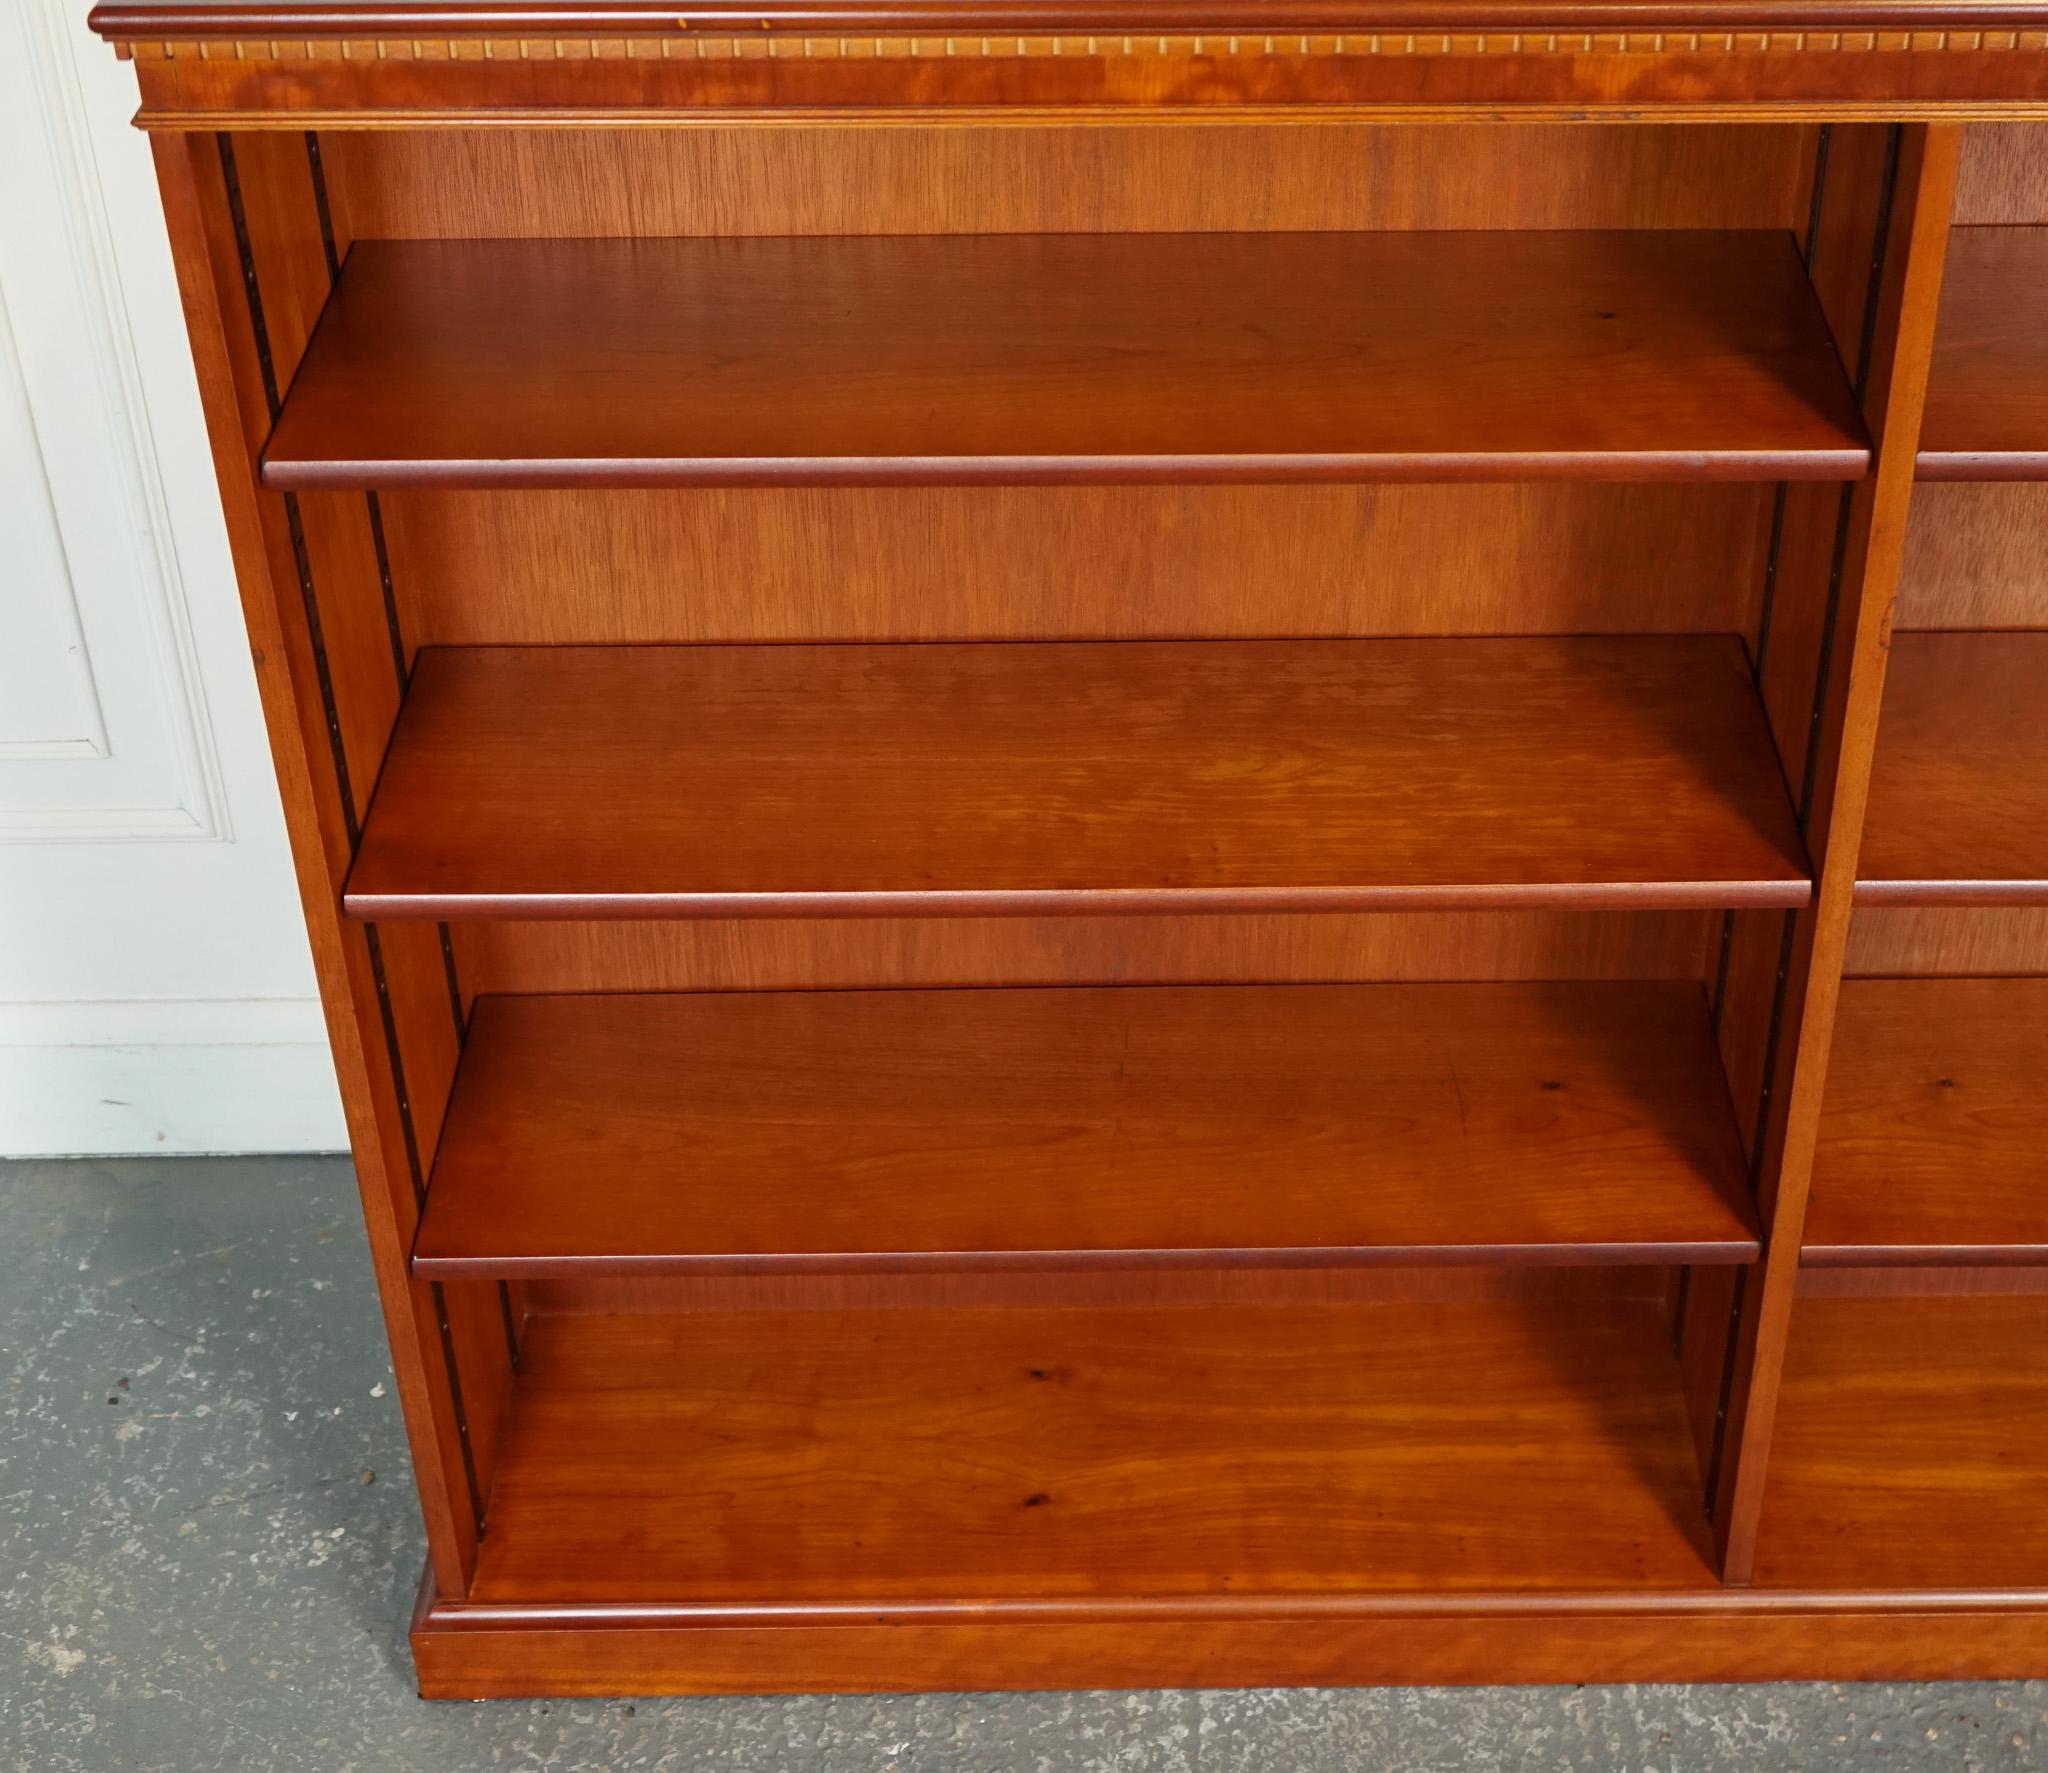 Yew VINTAGE YEW DOUBLE FRONTED LOW OPEN BOOKCASE WiTH ADJUSTABLE SHELVES For Sale